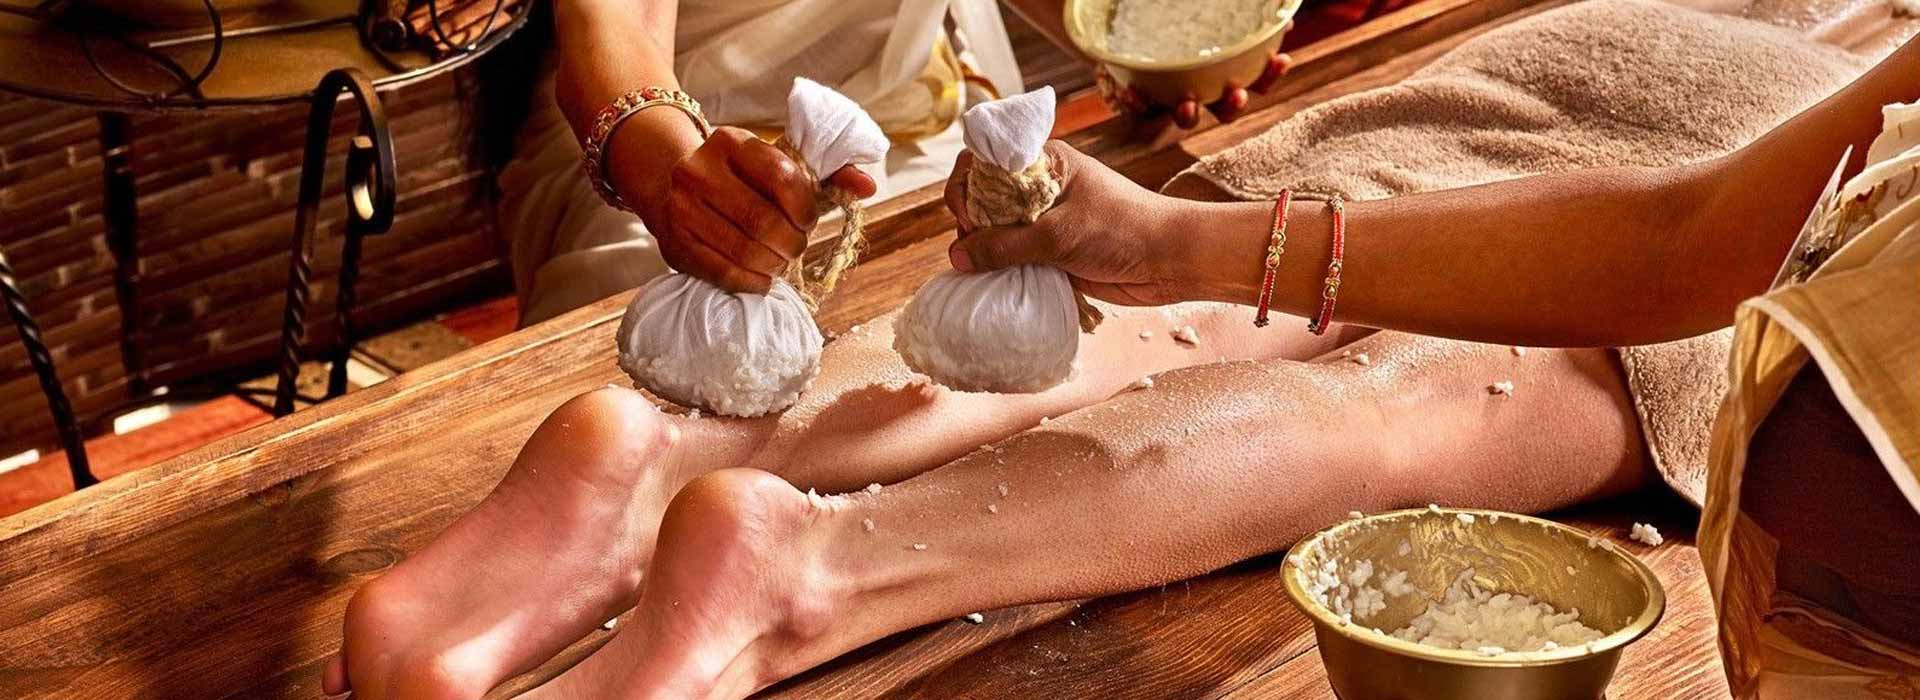 Ayurveda – Treatment Approaches